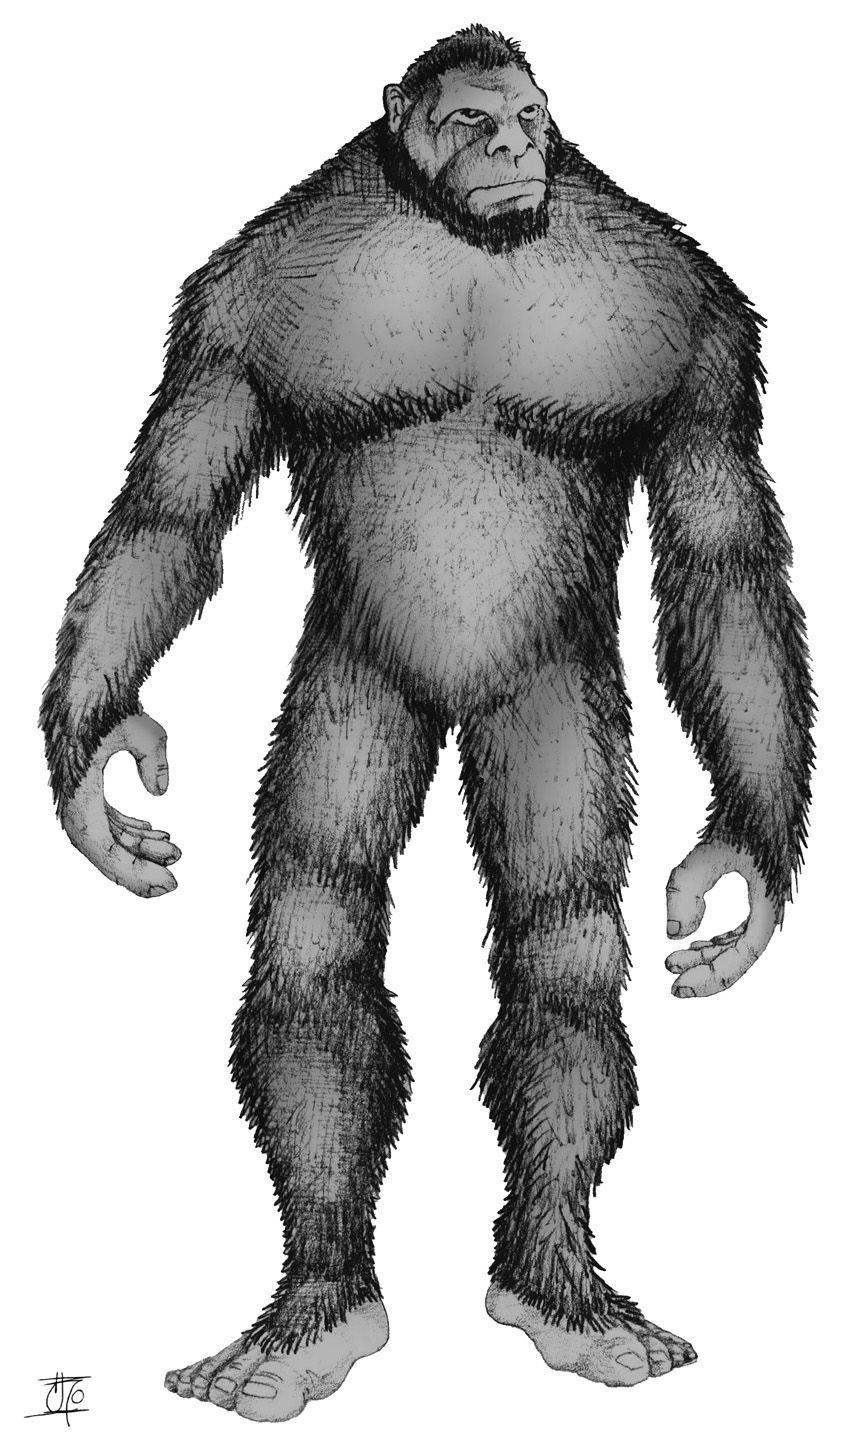 What's the Difference Between Yeti, Sasquatch and Bigfoot? Indian